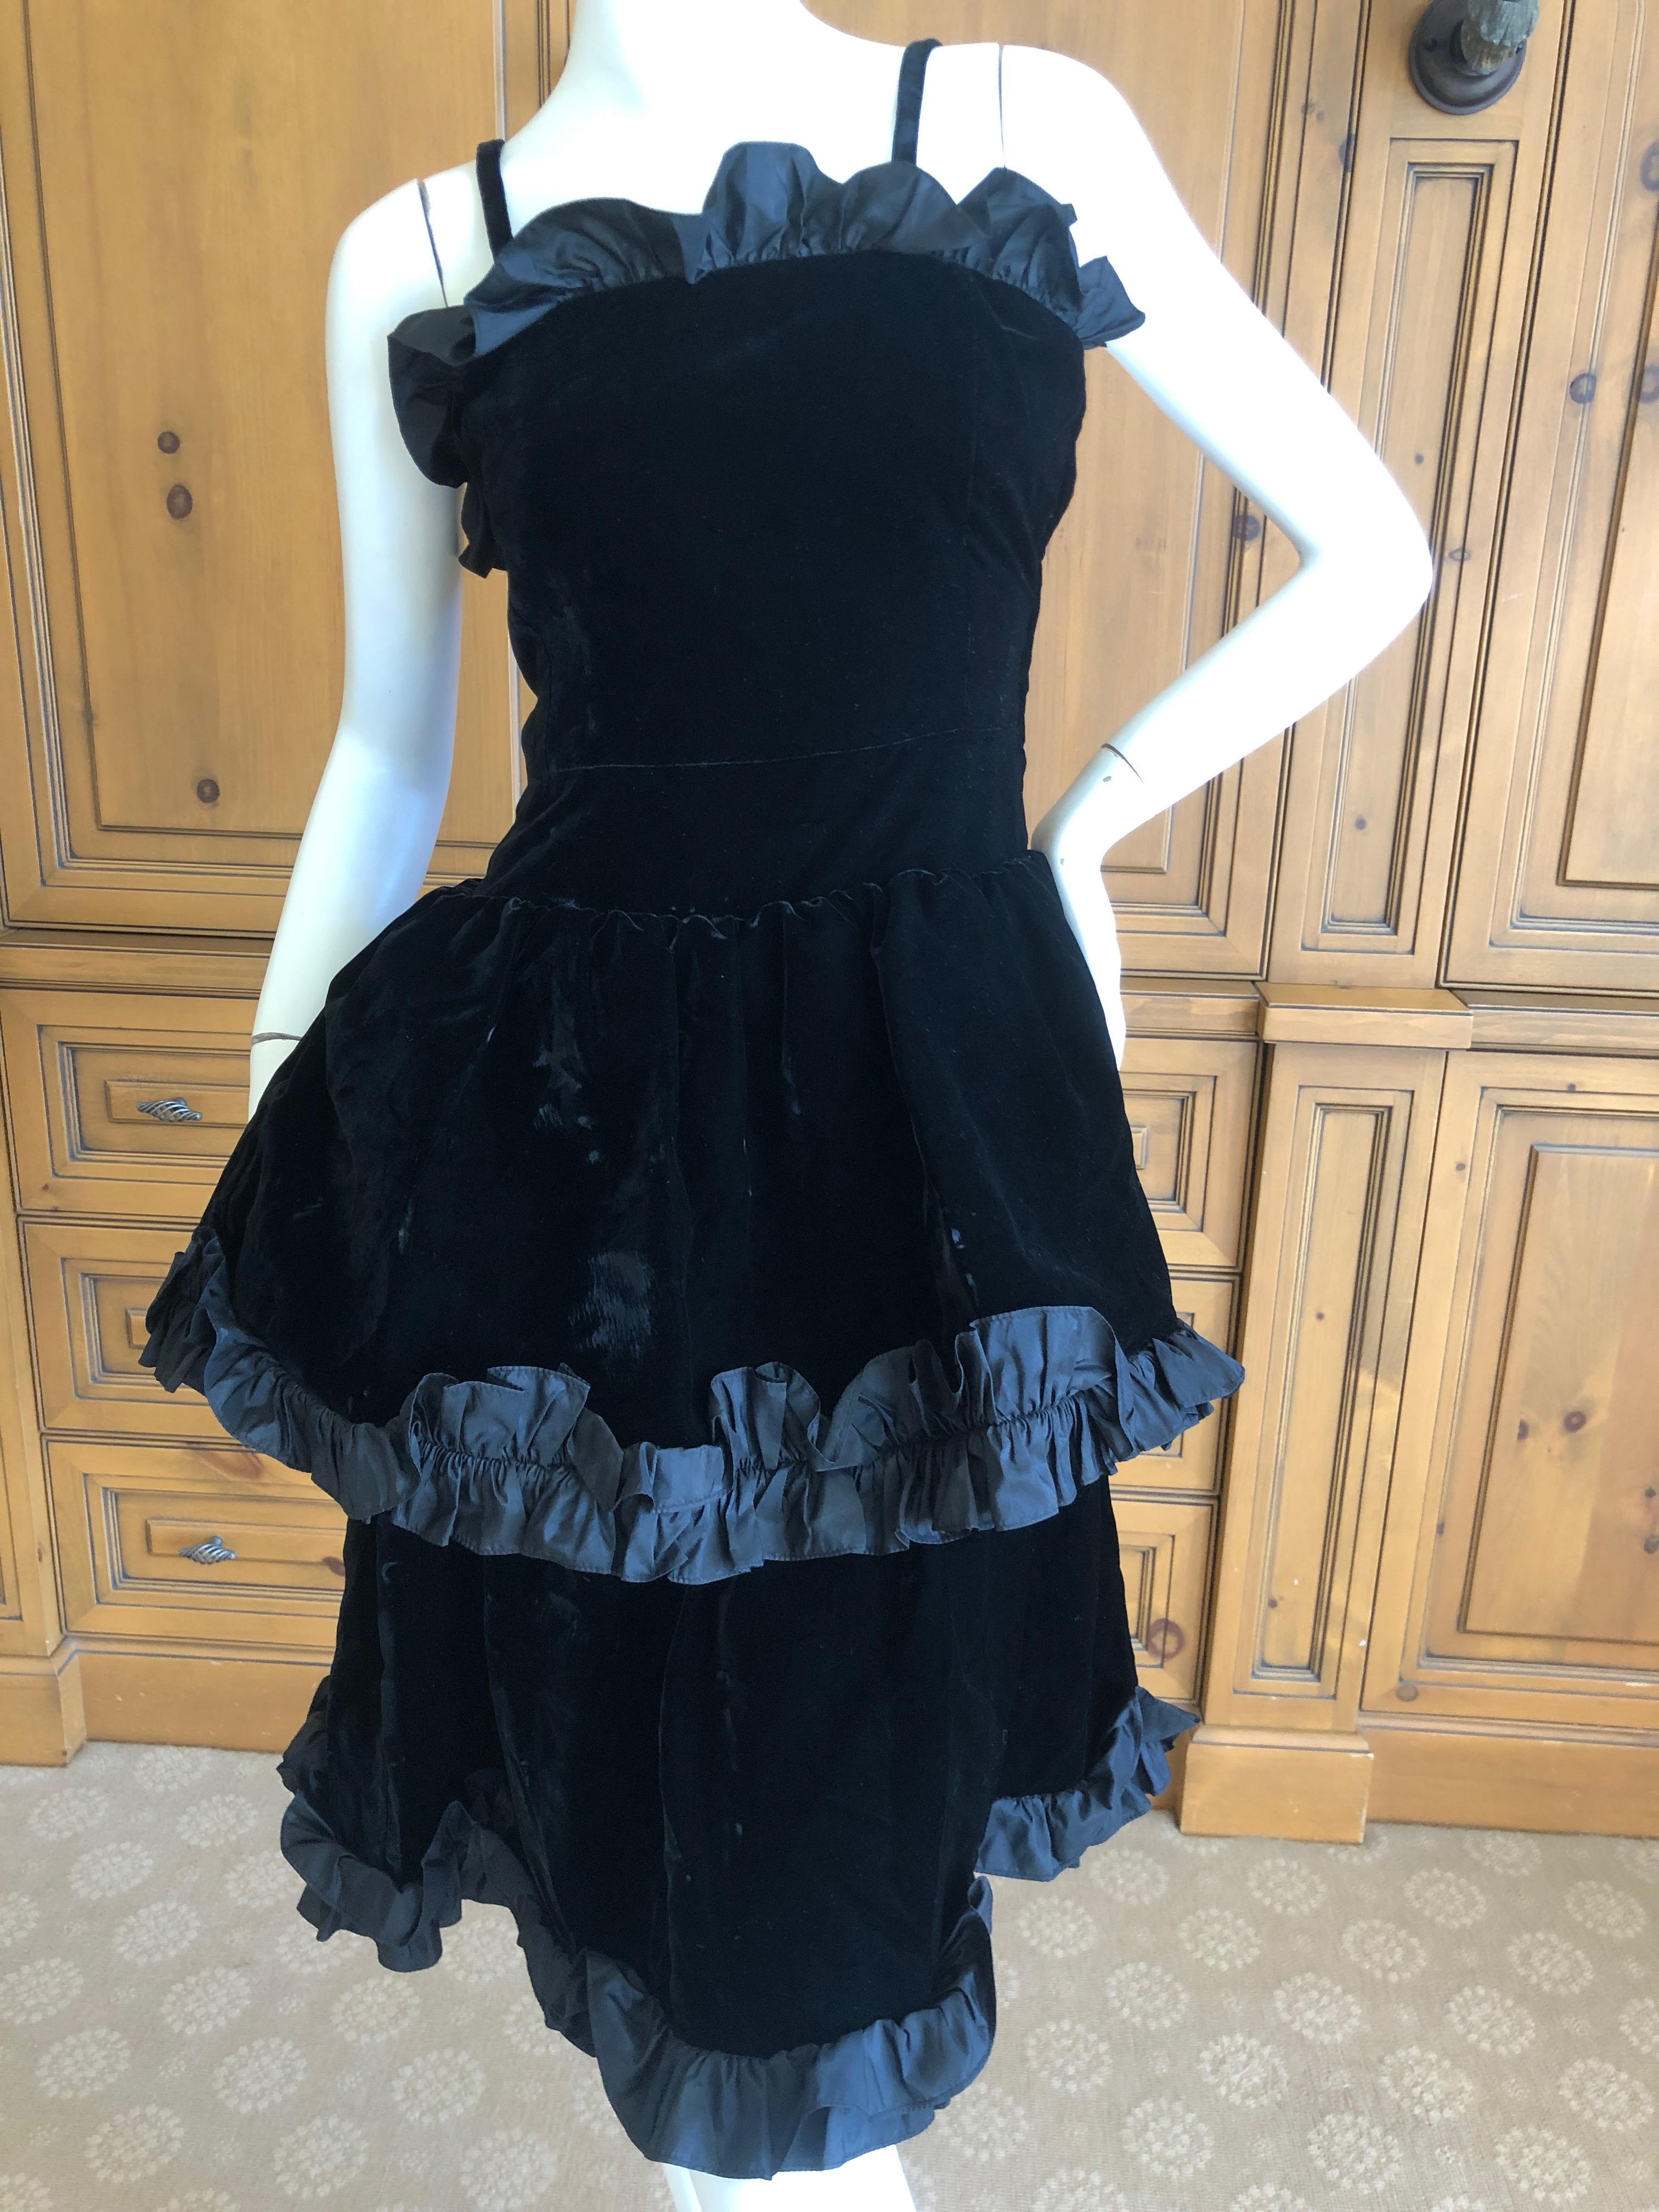 Yves Saint Laurent Rive Gauche Vintage Black Velvet Ruffle Trim Cocktail Dress.
There are two straps, but it could be worn strapless. 
I show it both ways.
Marked size 34
Bust 32